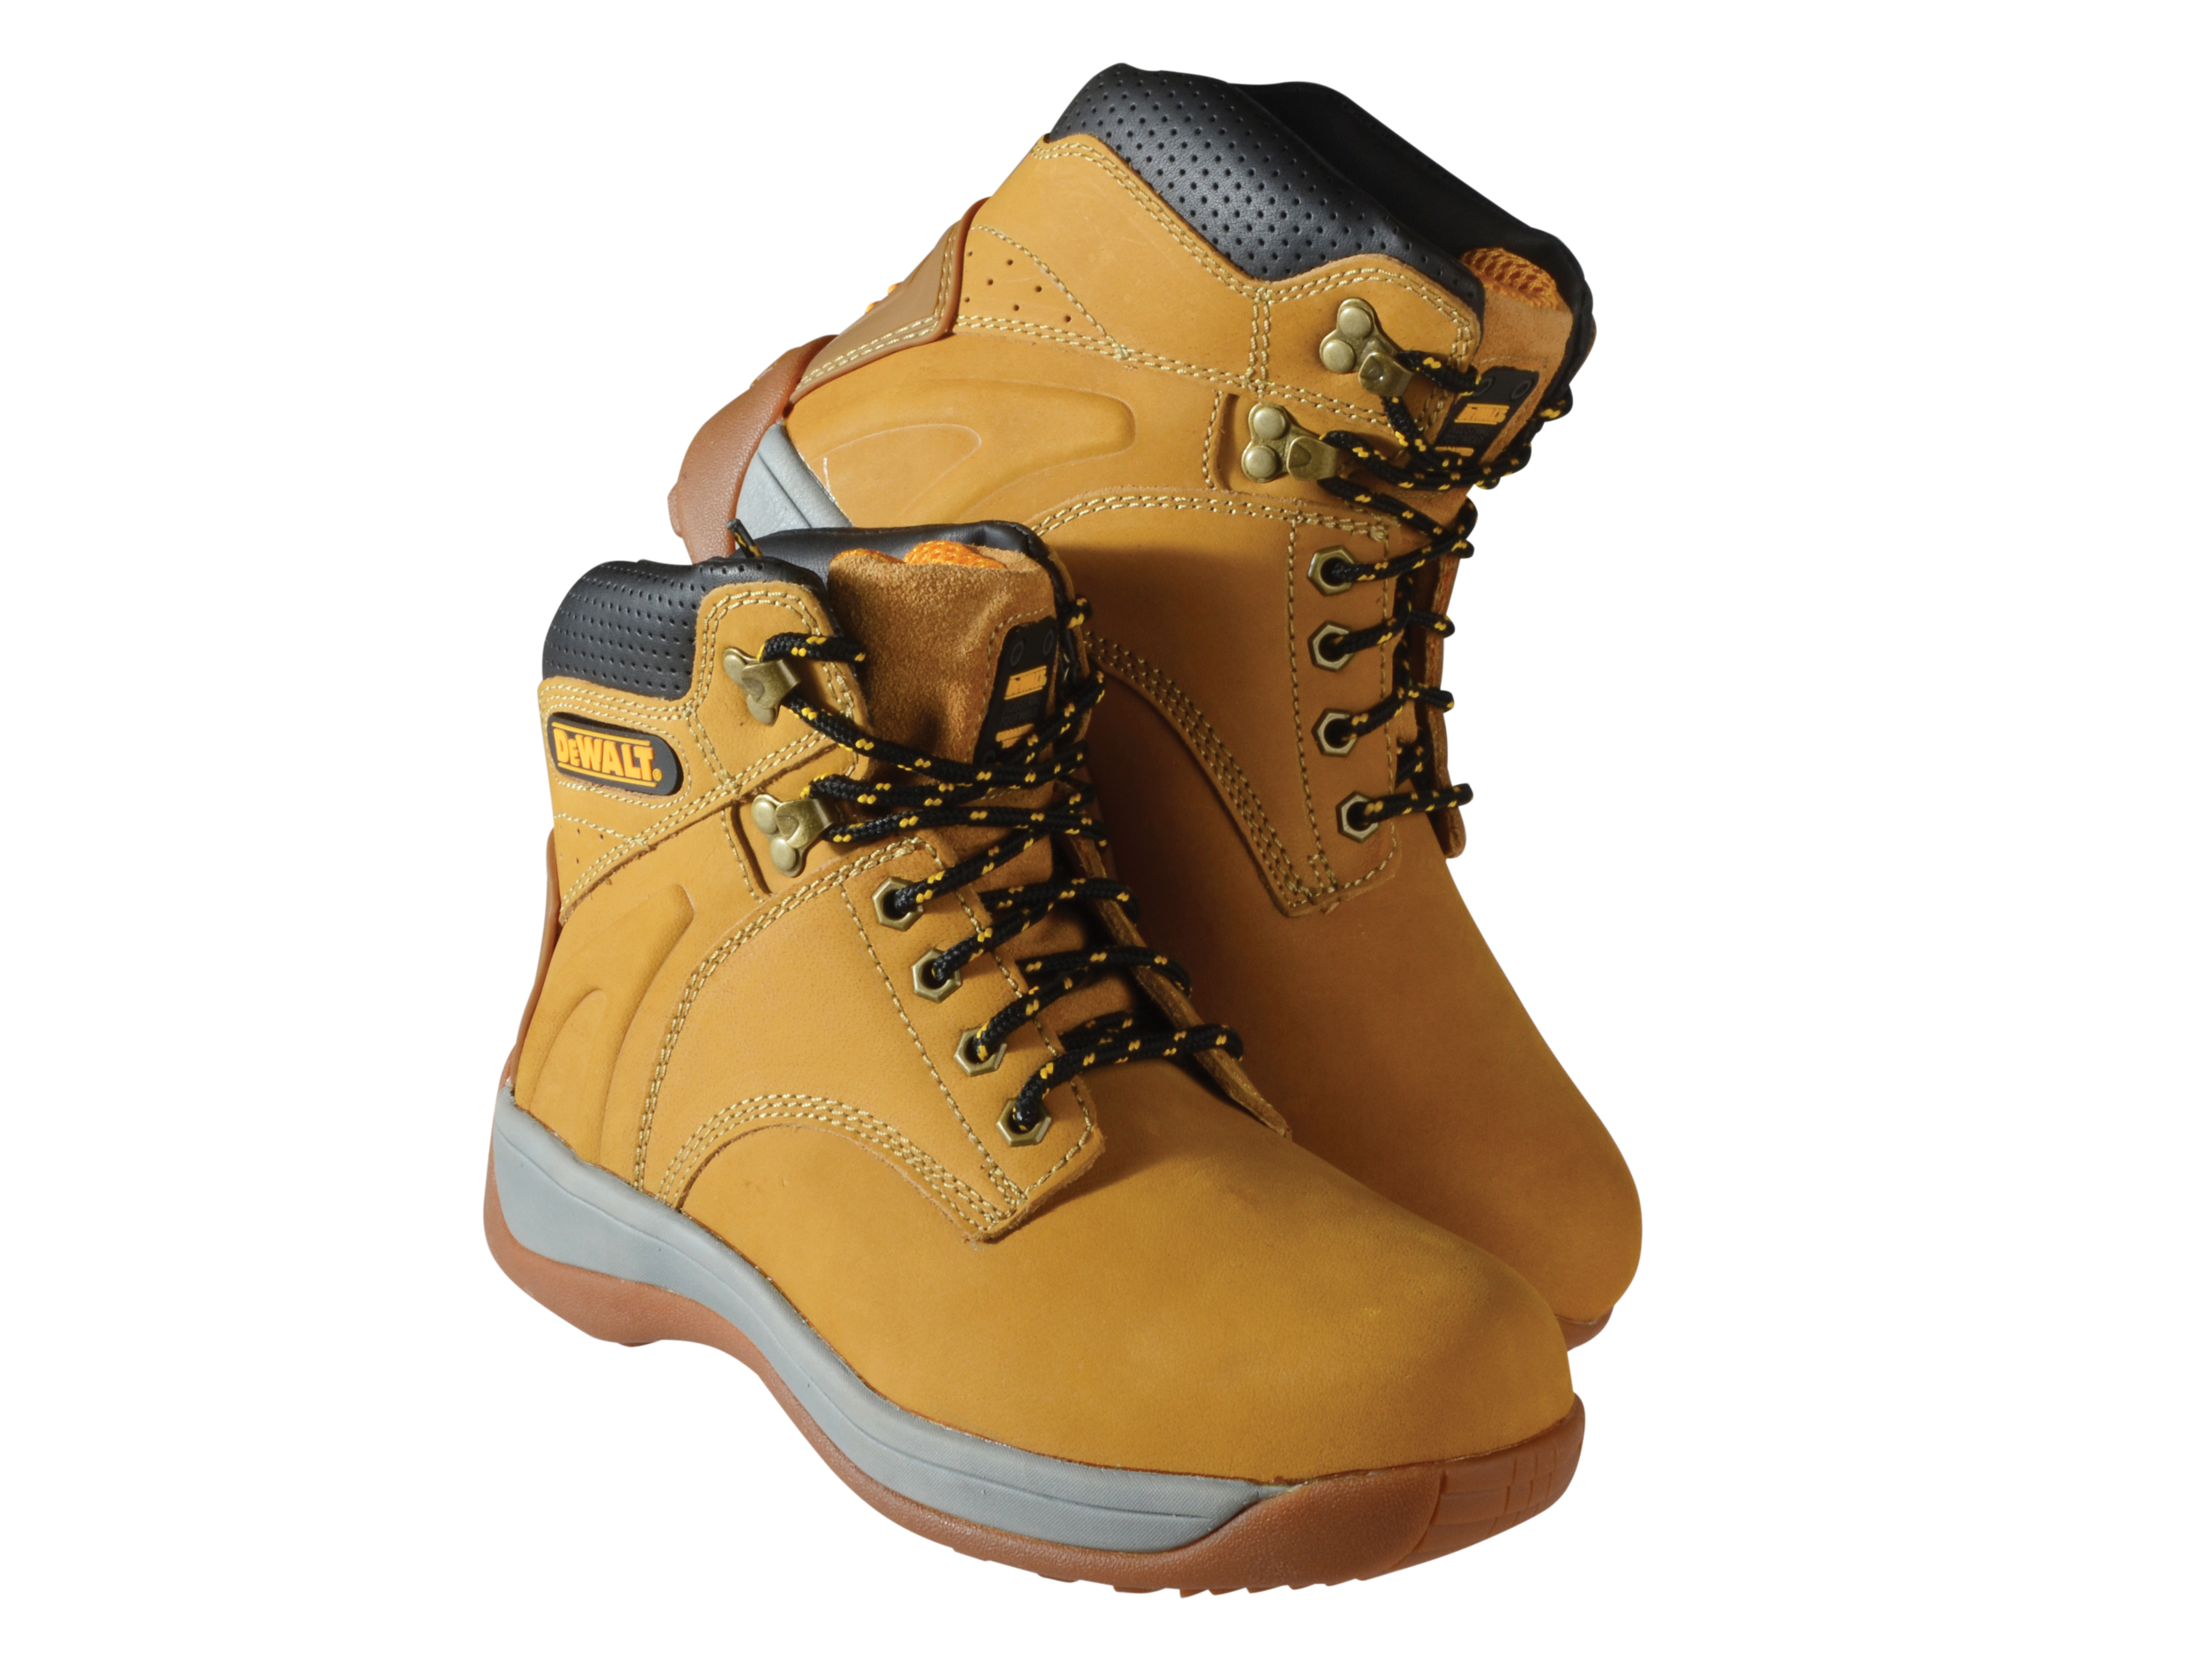 safety boots uk sale